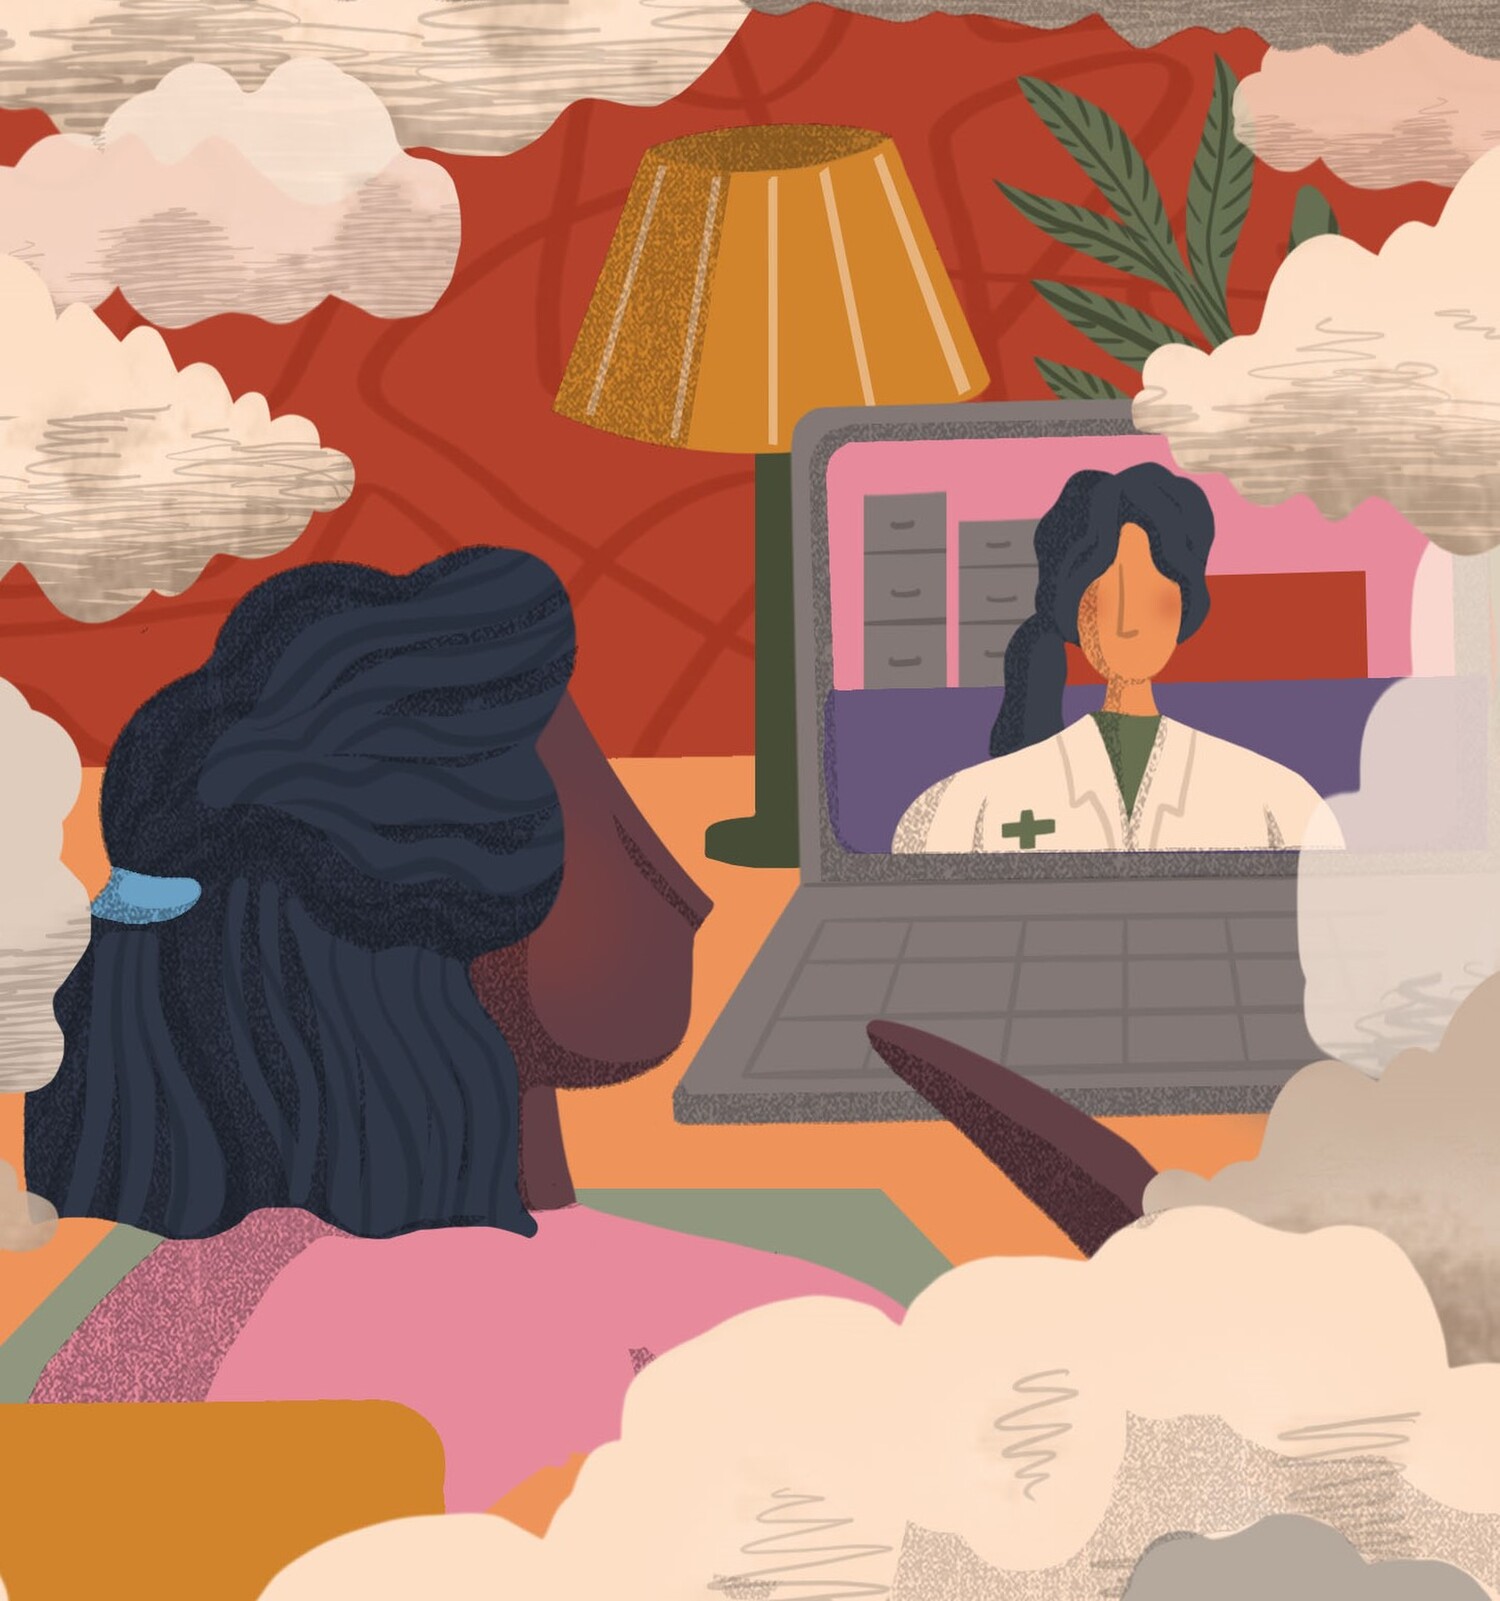 An illustration showing a patient talking to their doctor during a virtual telehealth appointment